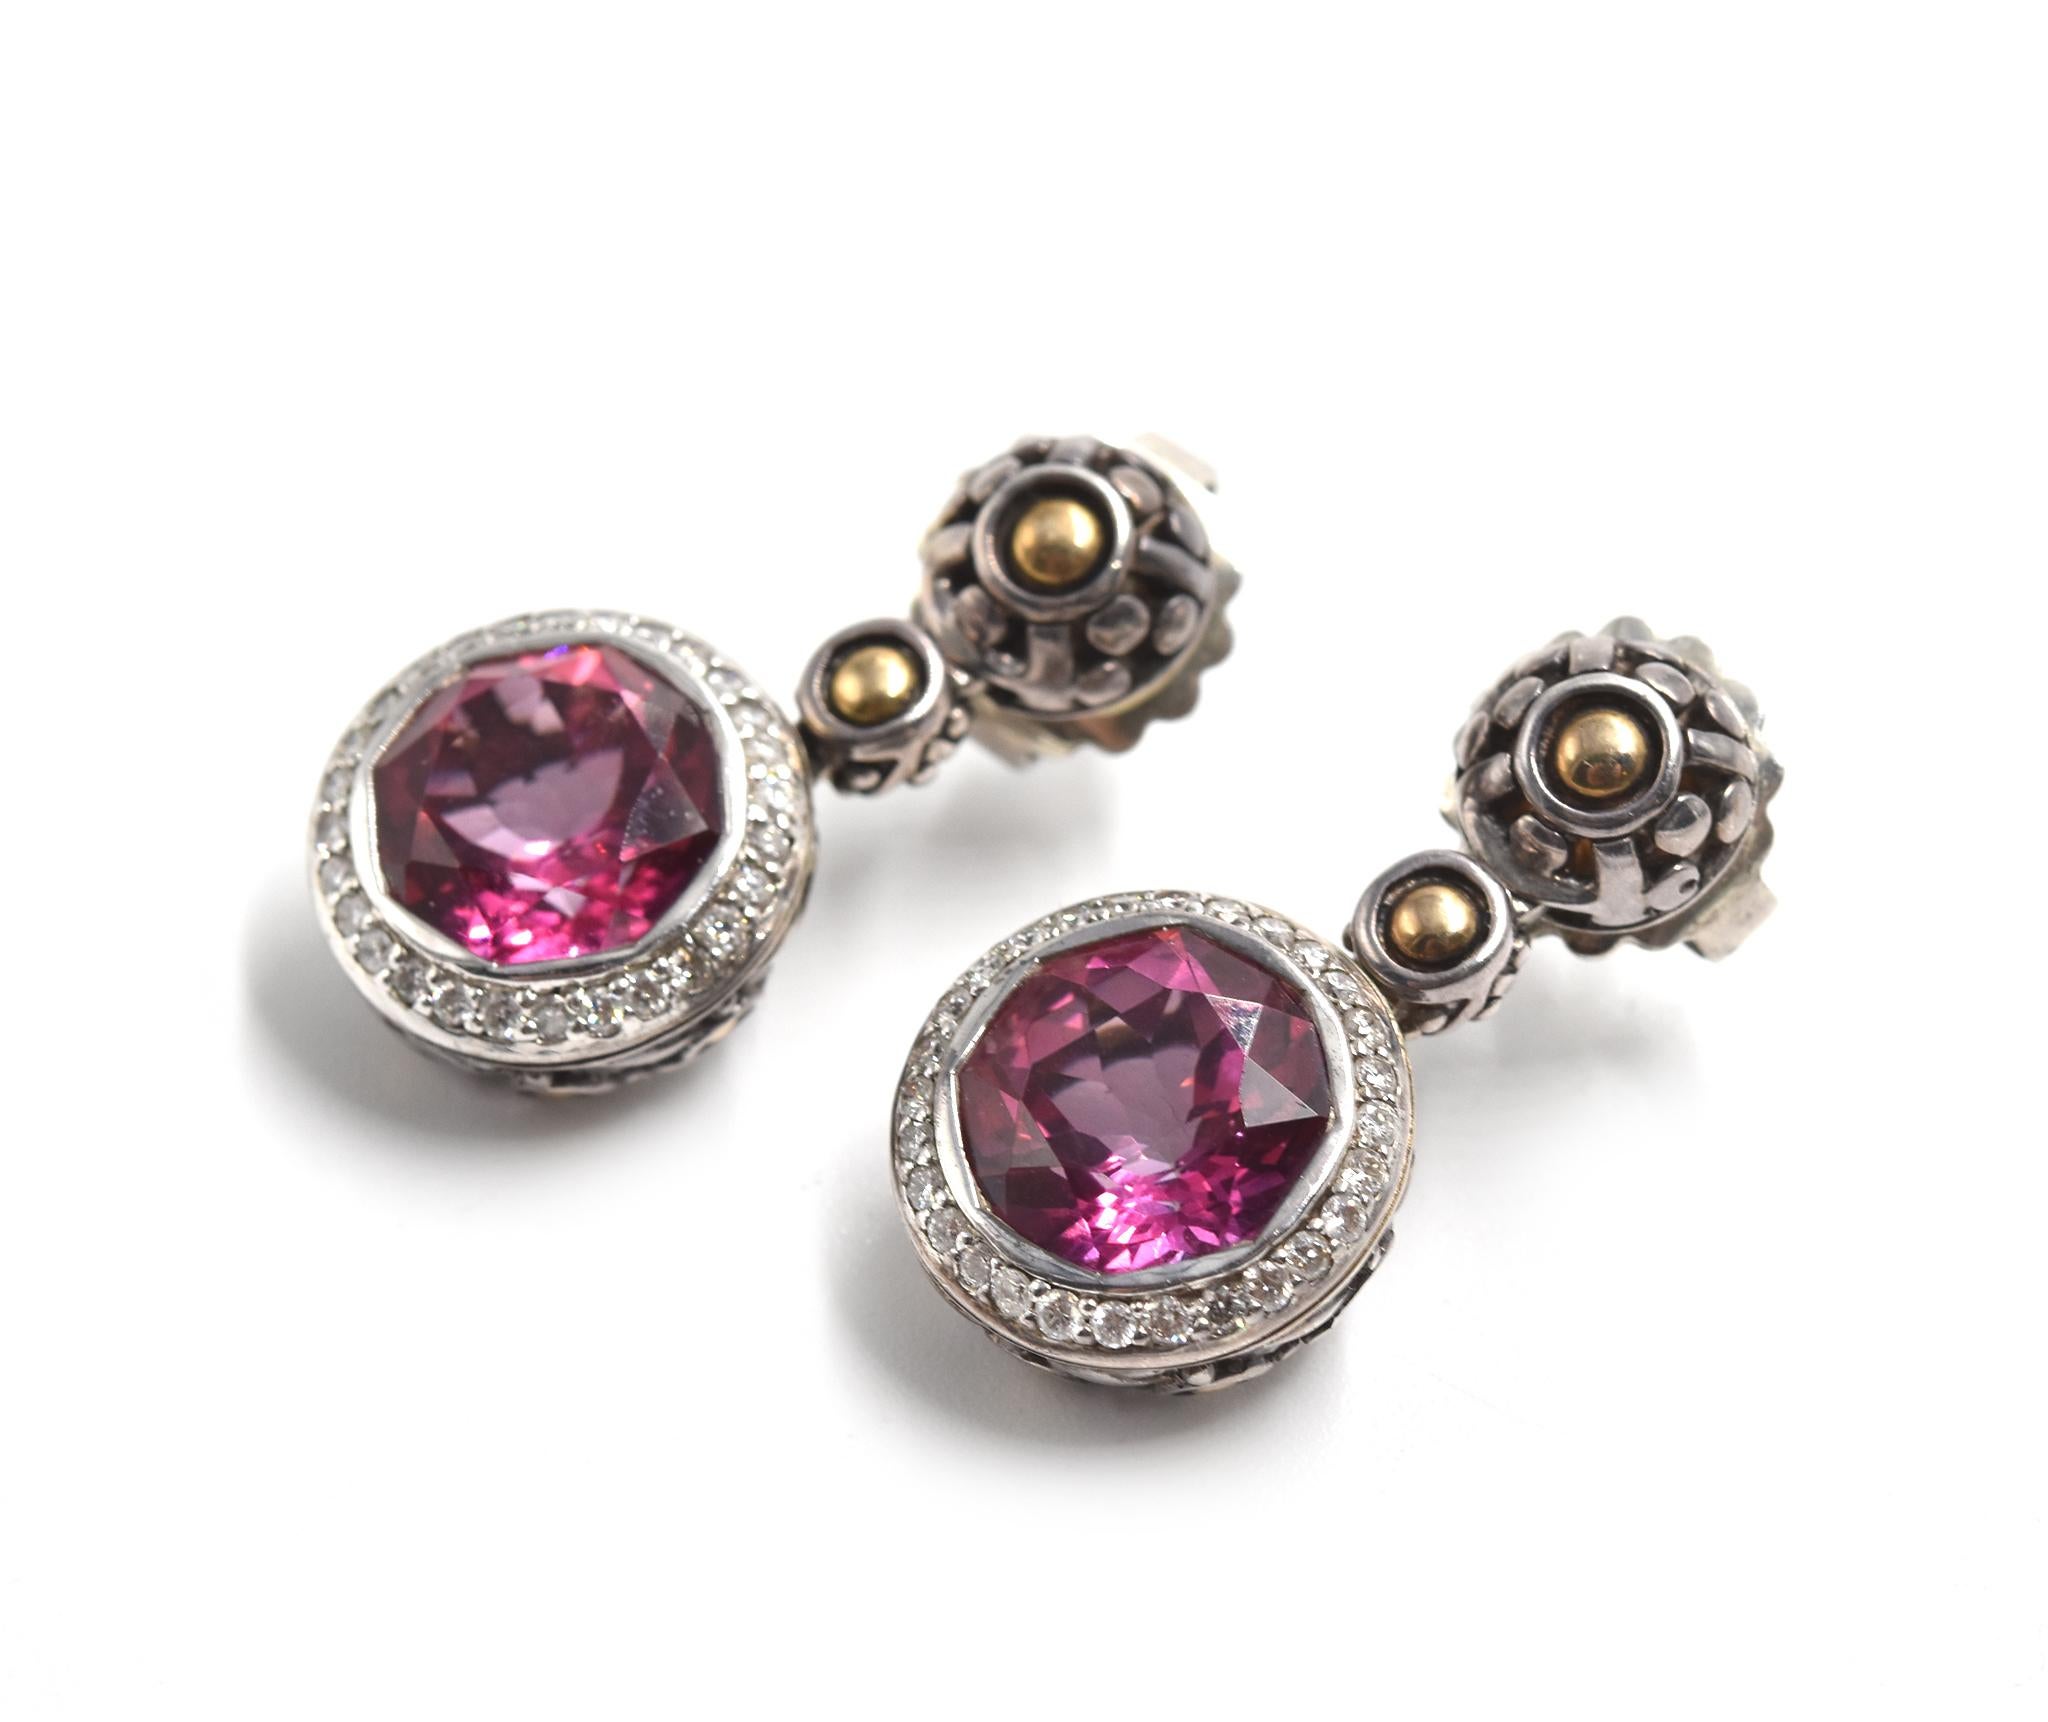 Designer: John Hardy
Material: sterling silver and 18k yellow gold
Gemstones: round brilliant cut mystic pink topaz
Dimensions: each earring measures 1-inch long and 1/2-inch wide
Weight: 11.74 grams
Retail: $2,295
